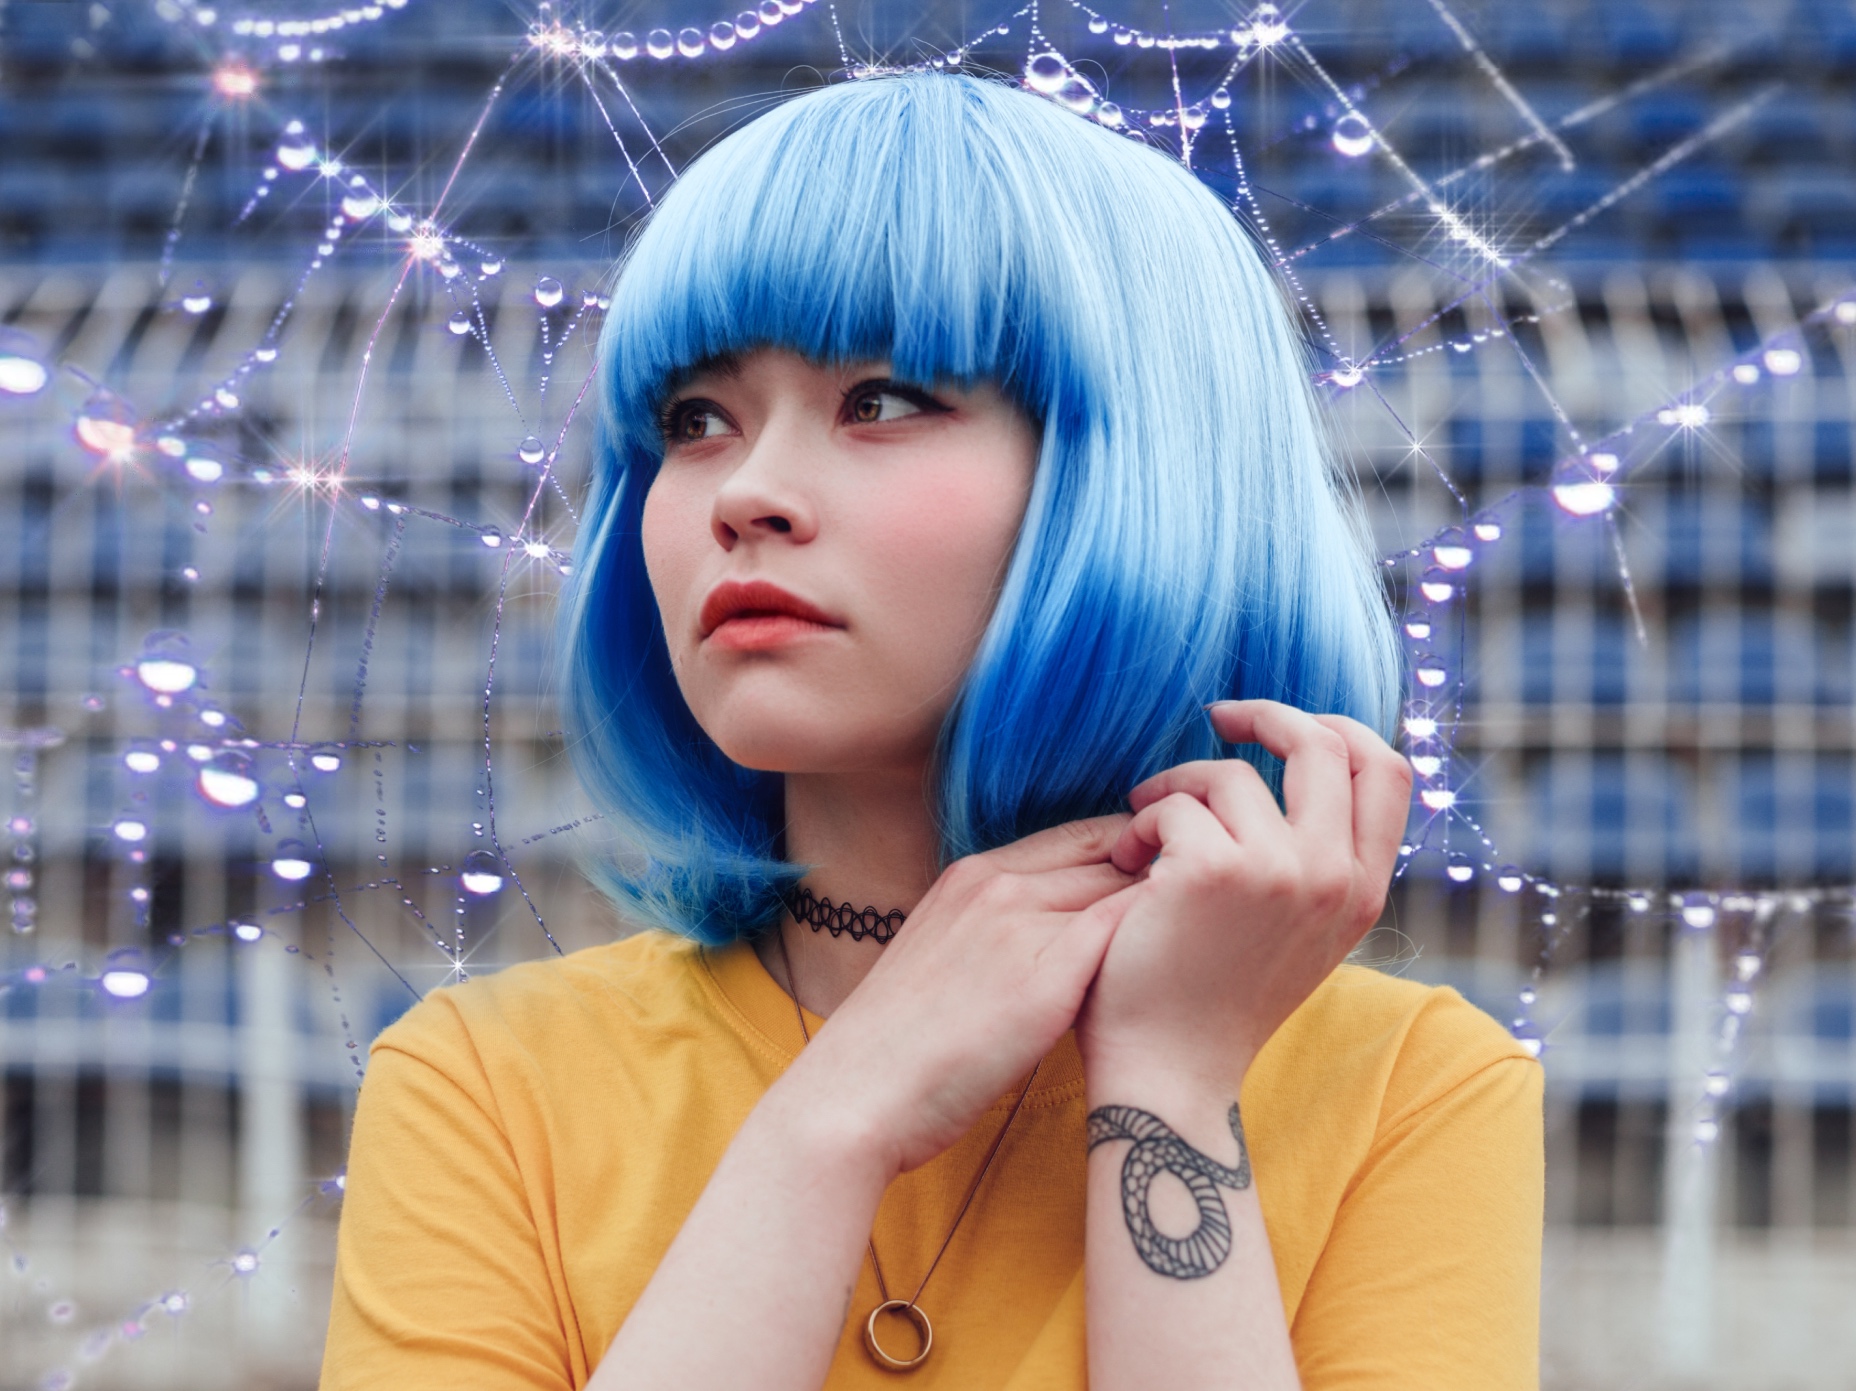 A woman with a yellow shirt and blue hair